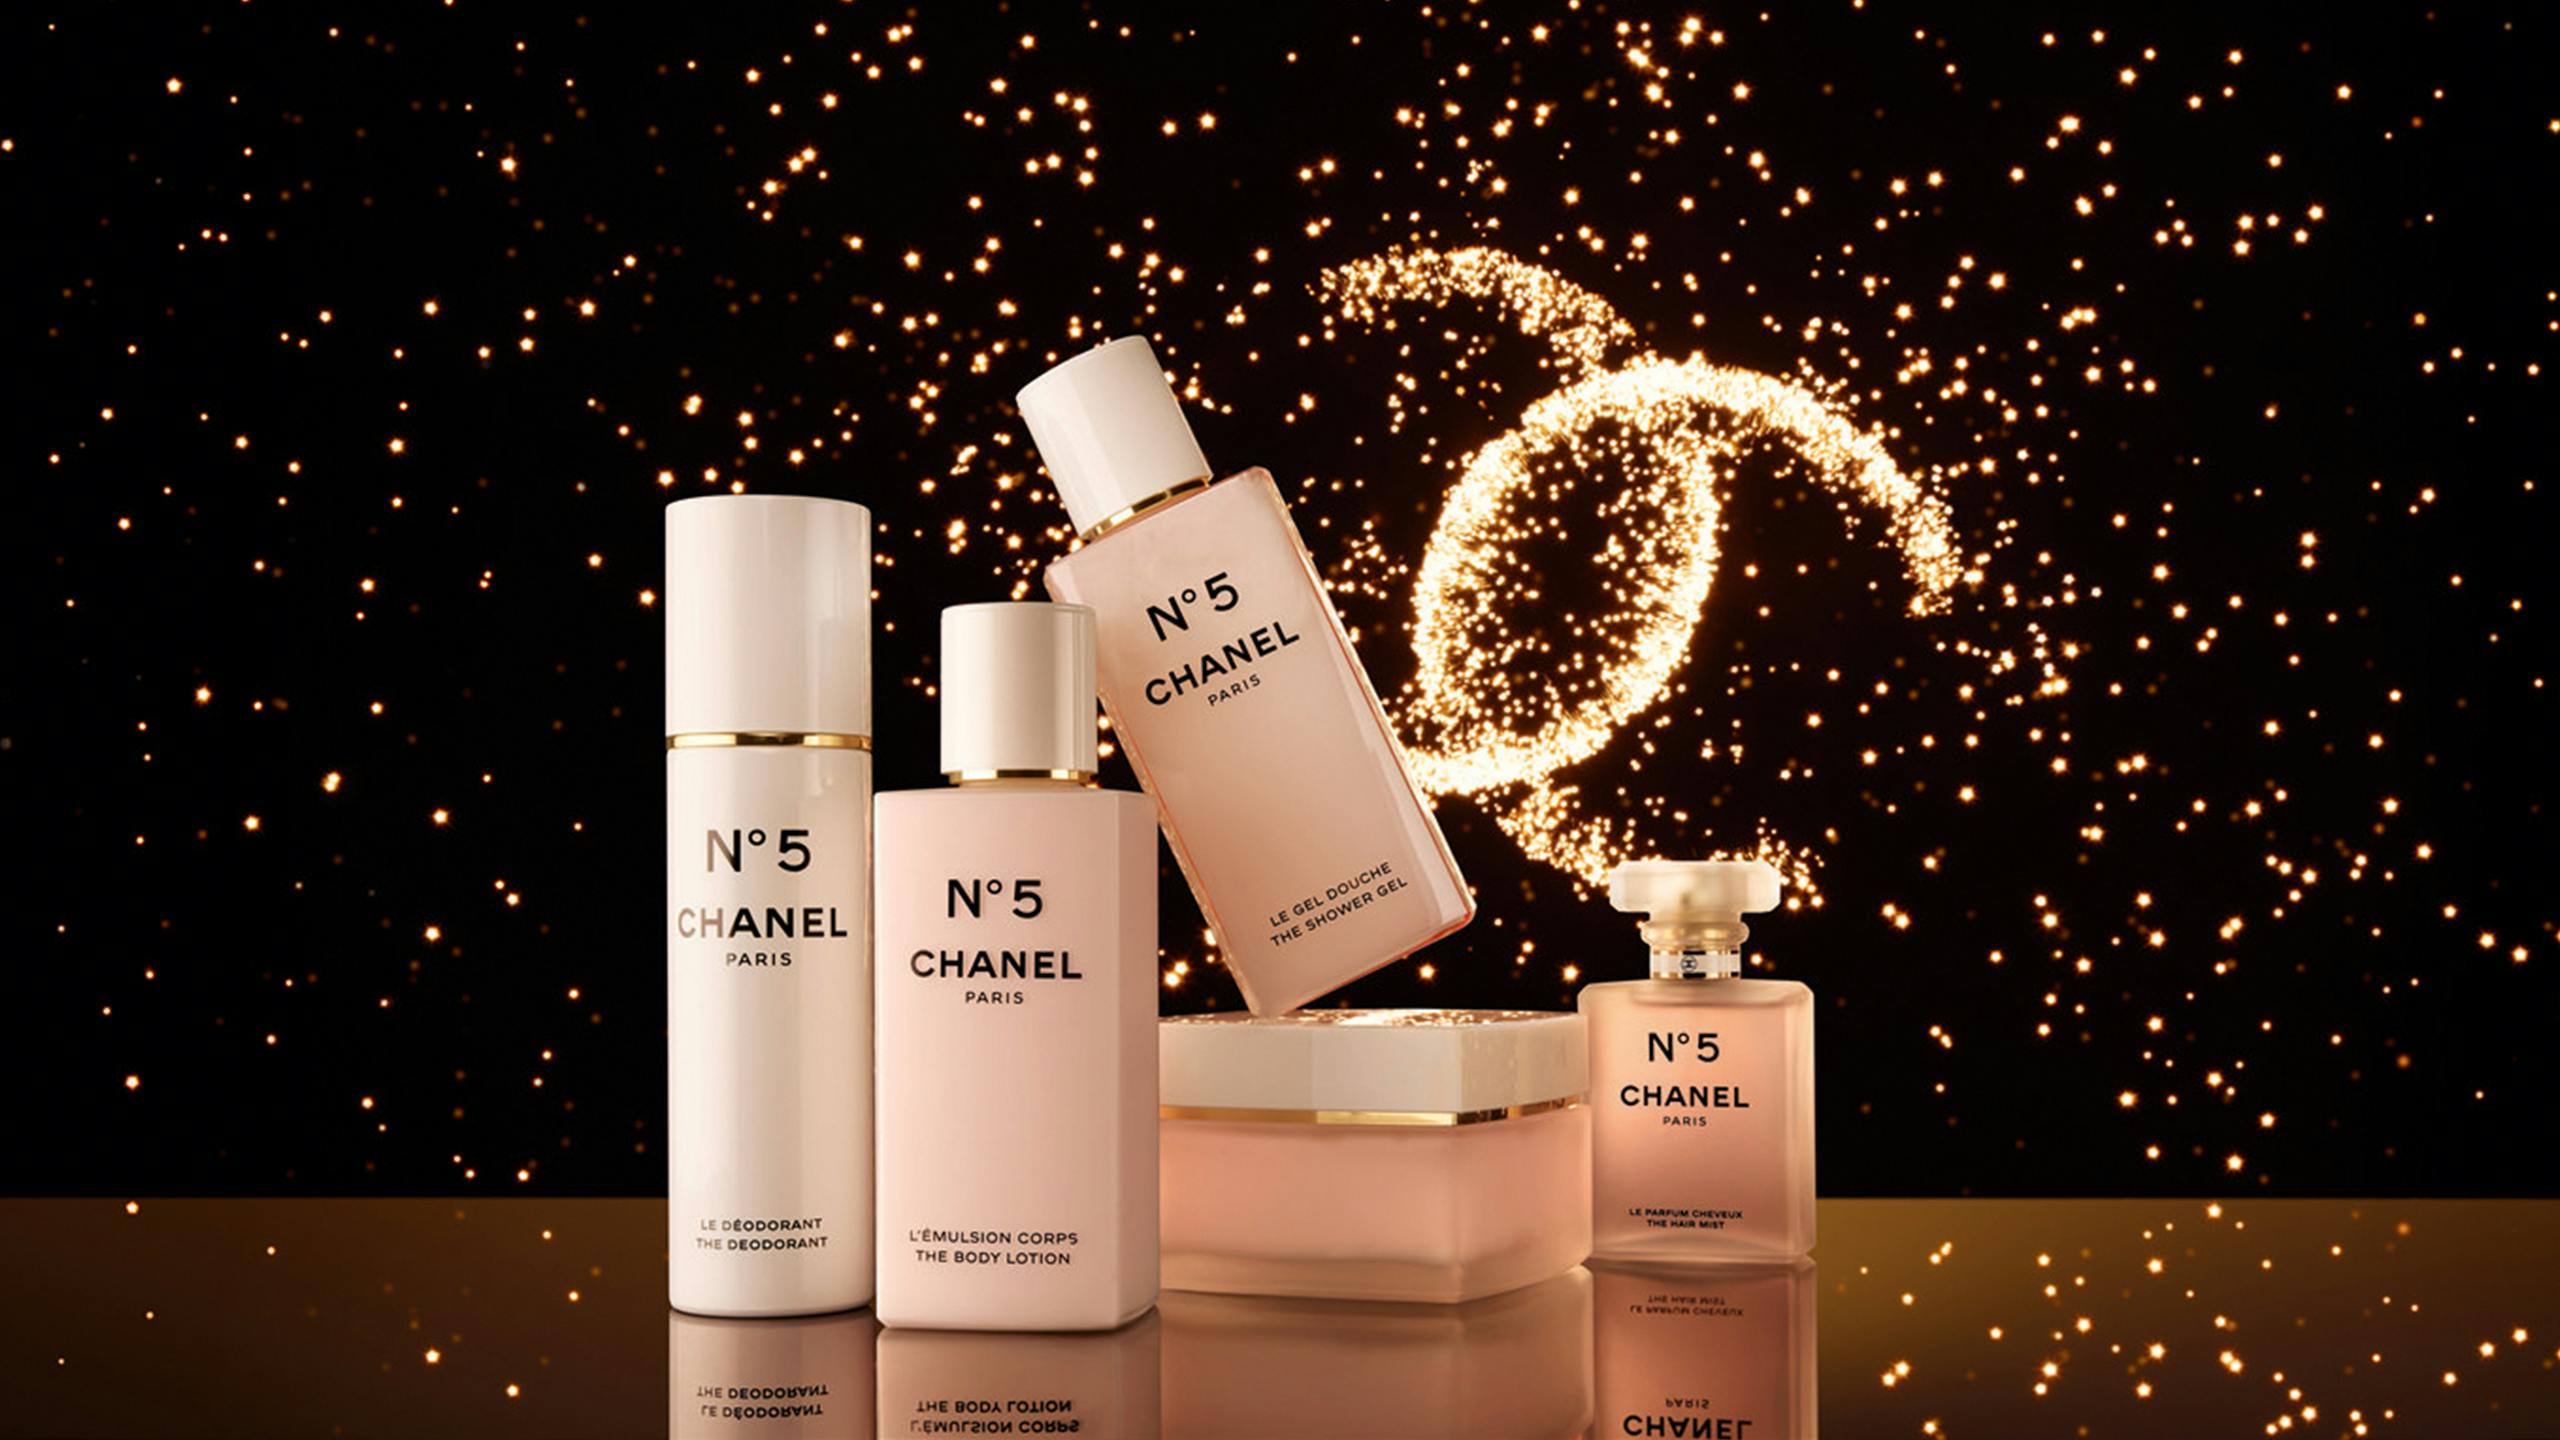 Chanel invites you to discover the latest bath and body essentials